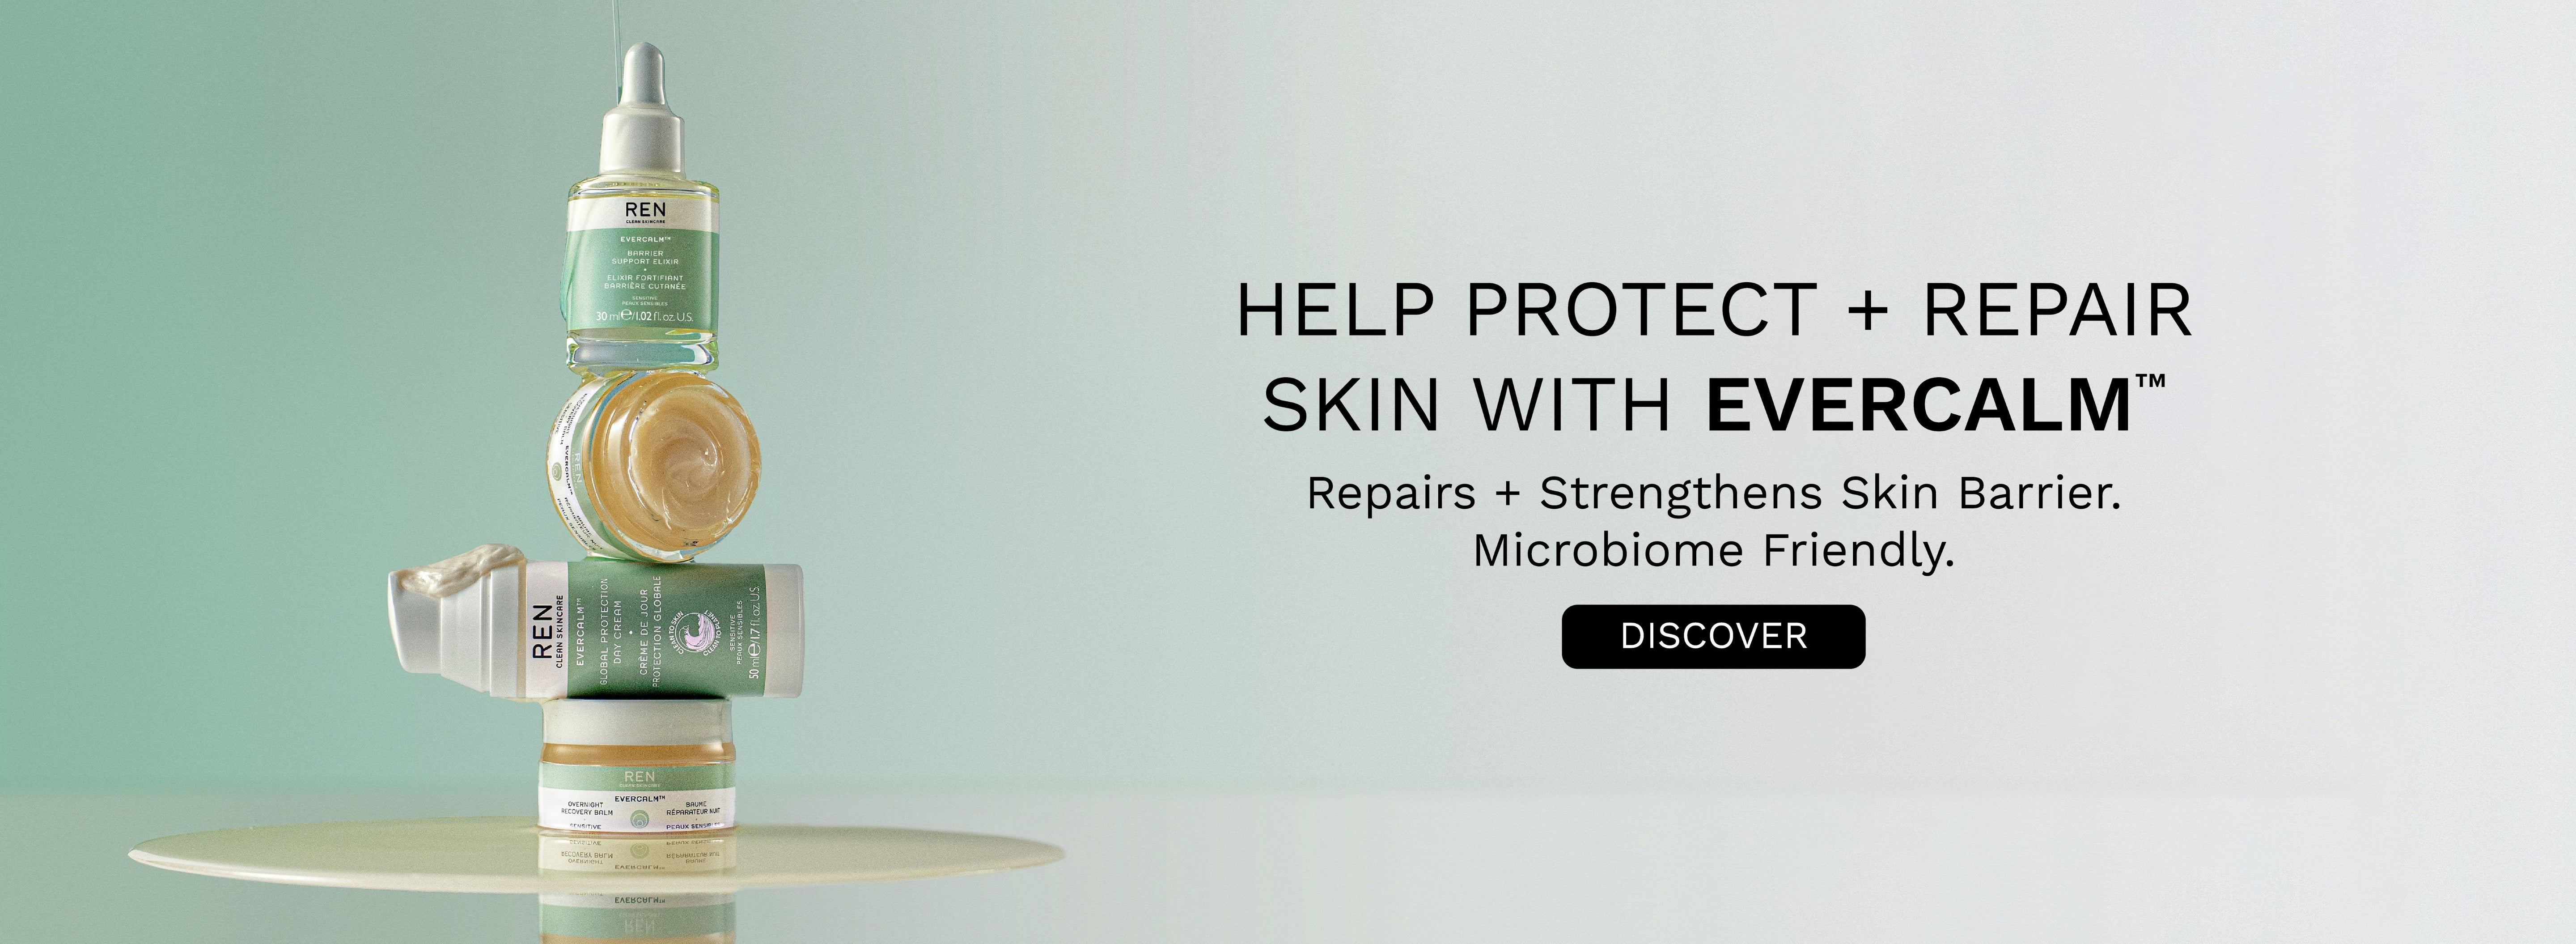 Help protect + repair with Evercalm. Repairs + Strengthens skin barrier. Microbiome friendly. Discover.